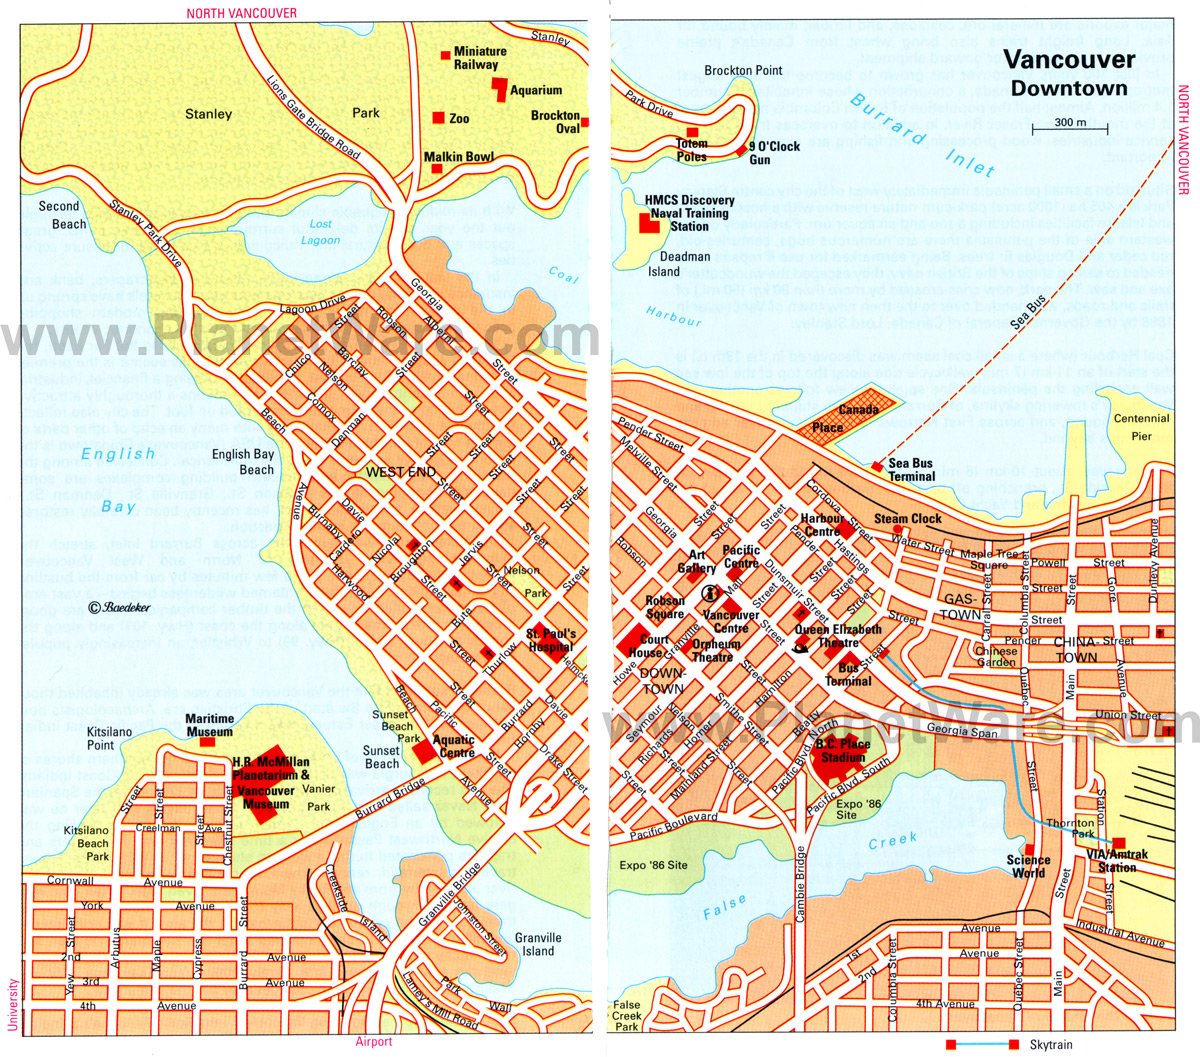 Vancouver Map - Tourist Attractions